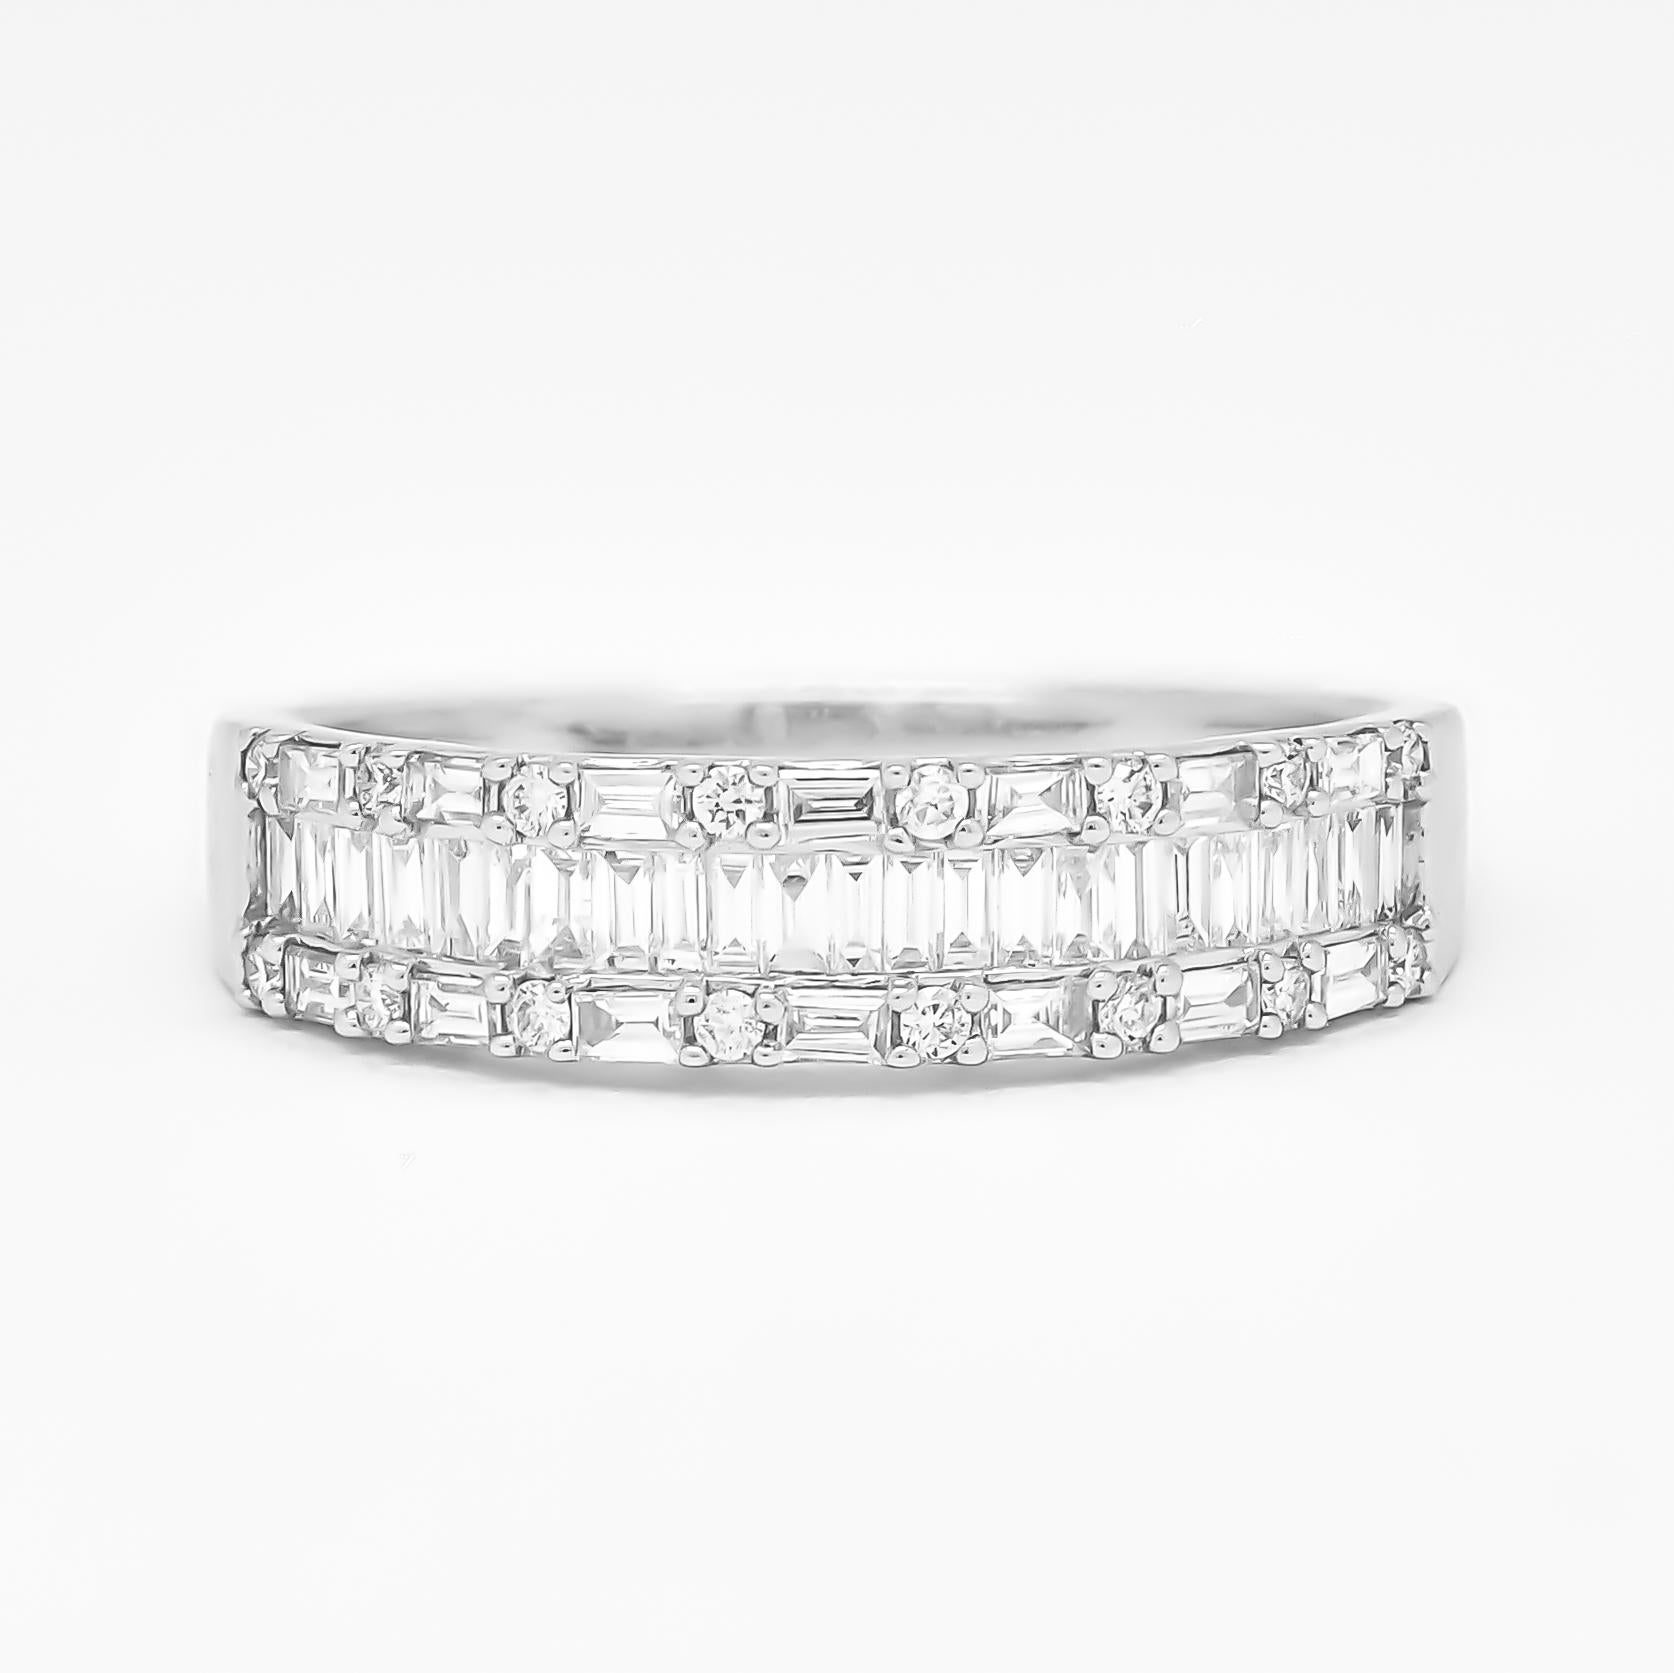 For Sale:  Exclusive Design 0.70 Carat Baguette Diamond Wedding Ring in White Gold 5